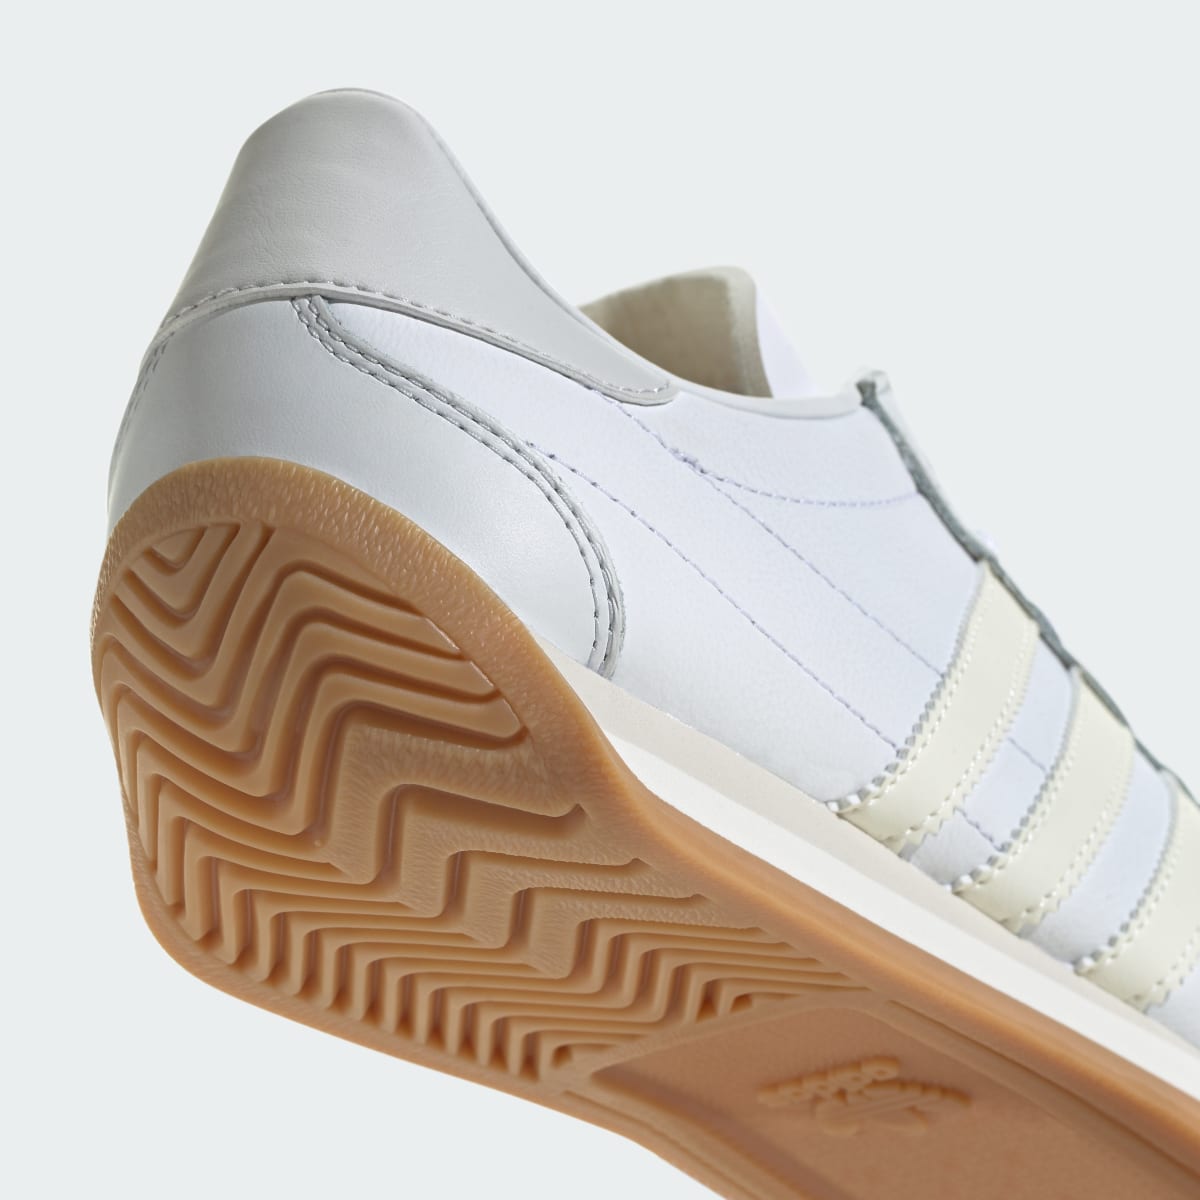 Adidas Country OG Shoes. 9